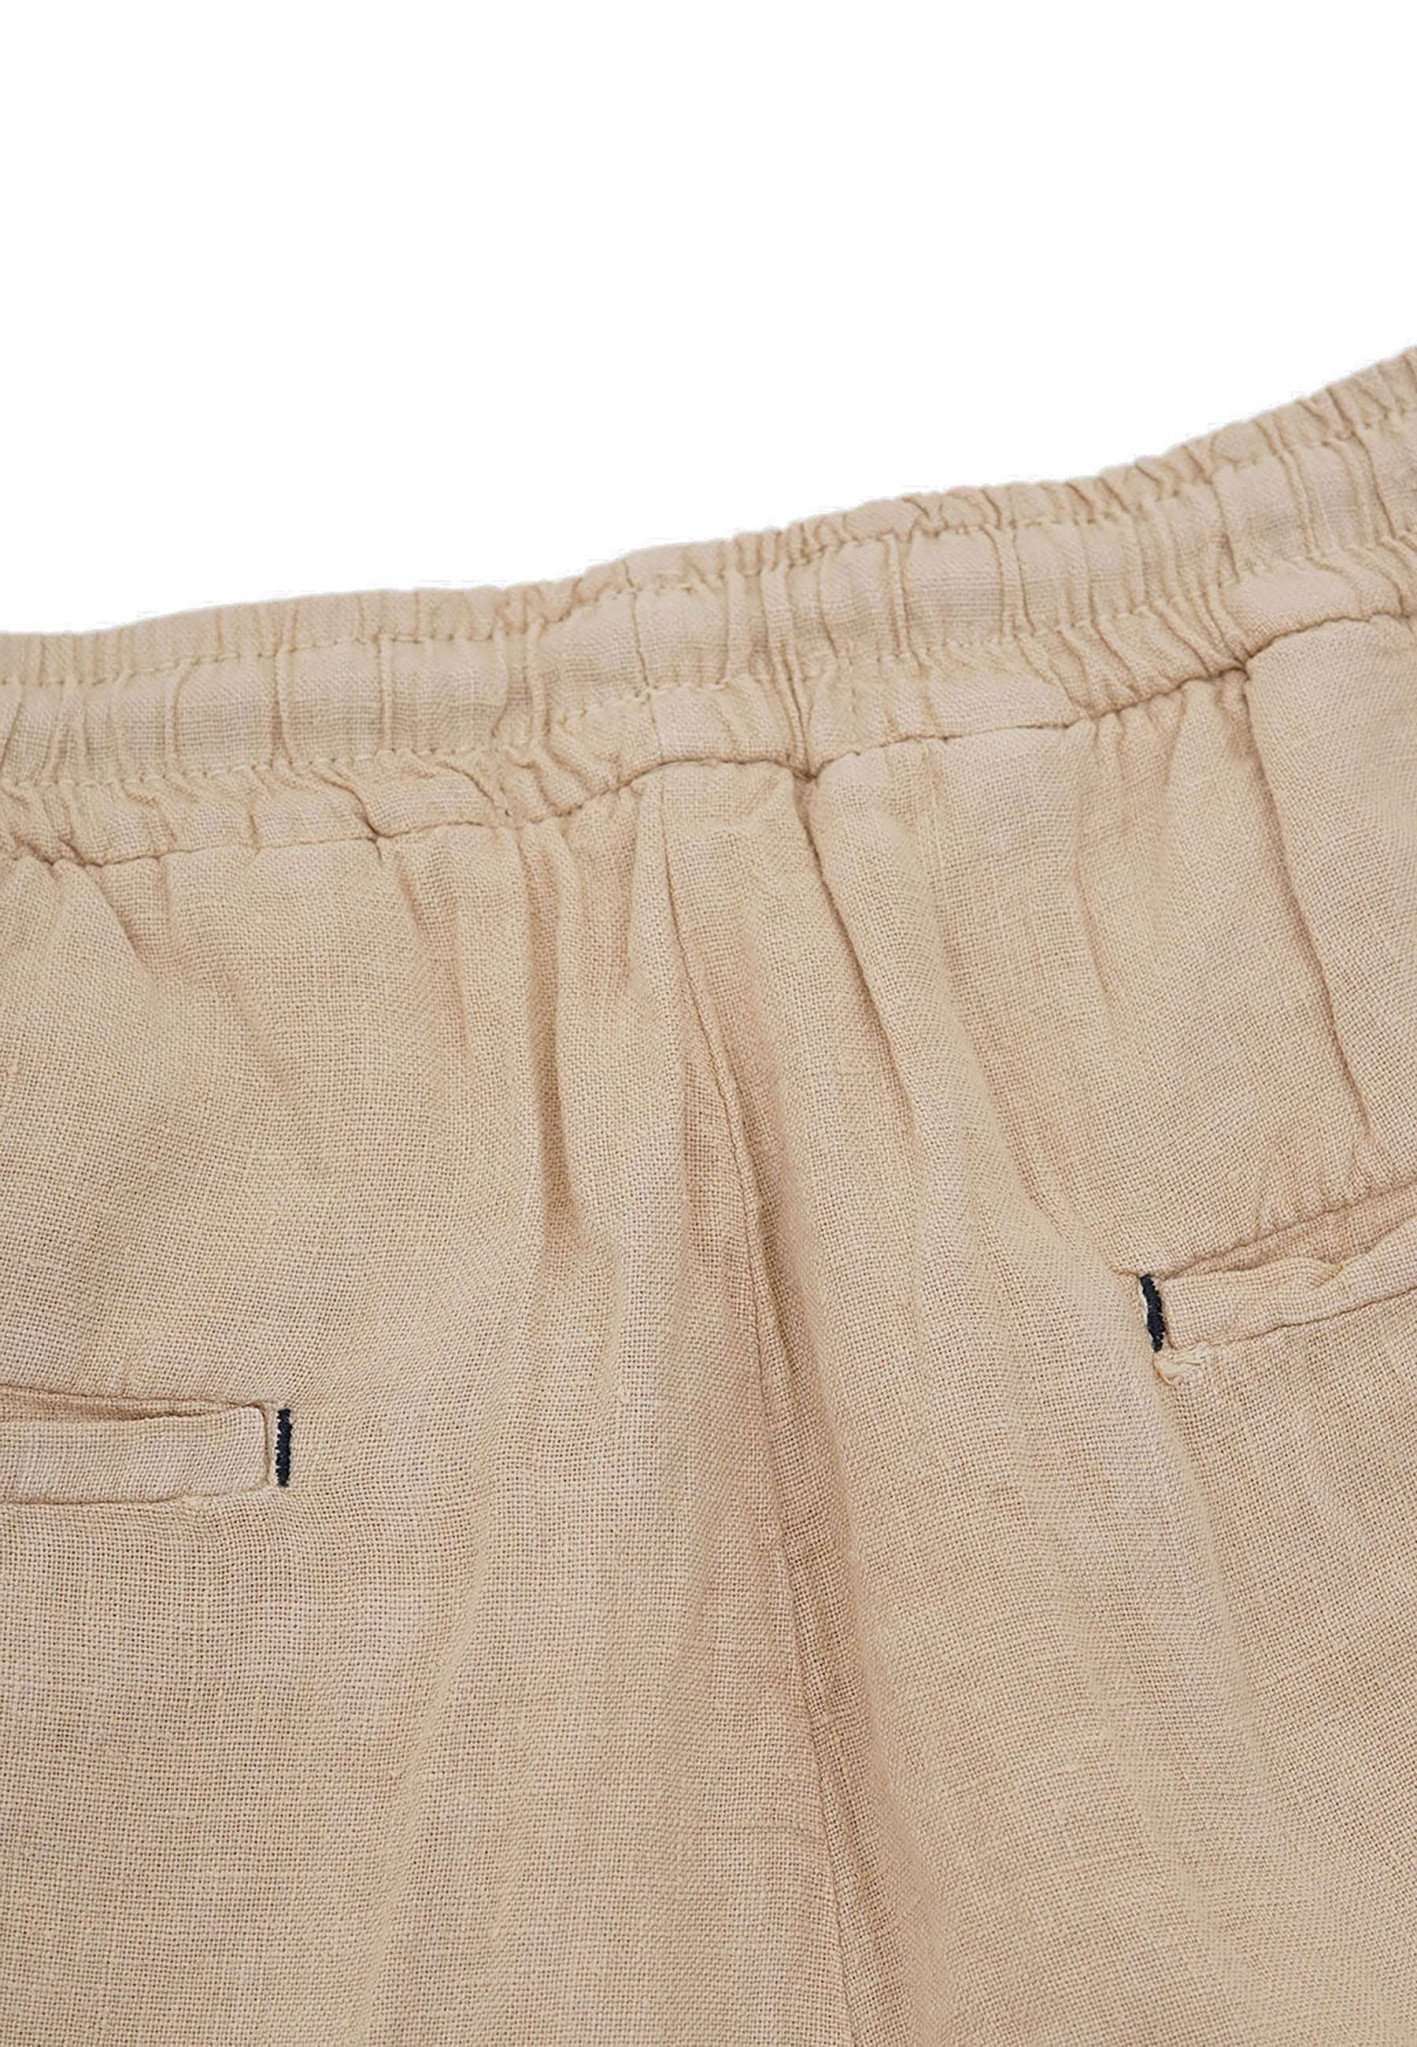 Pants Cropped Linen in Light Beige Hosen Colours and Sons   